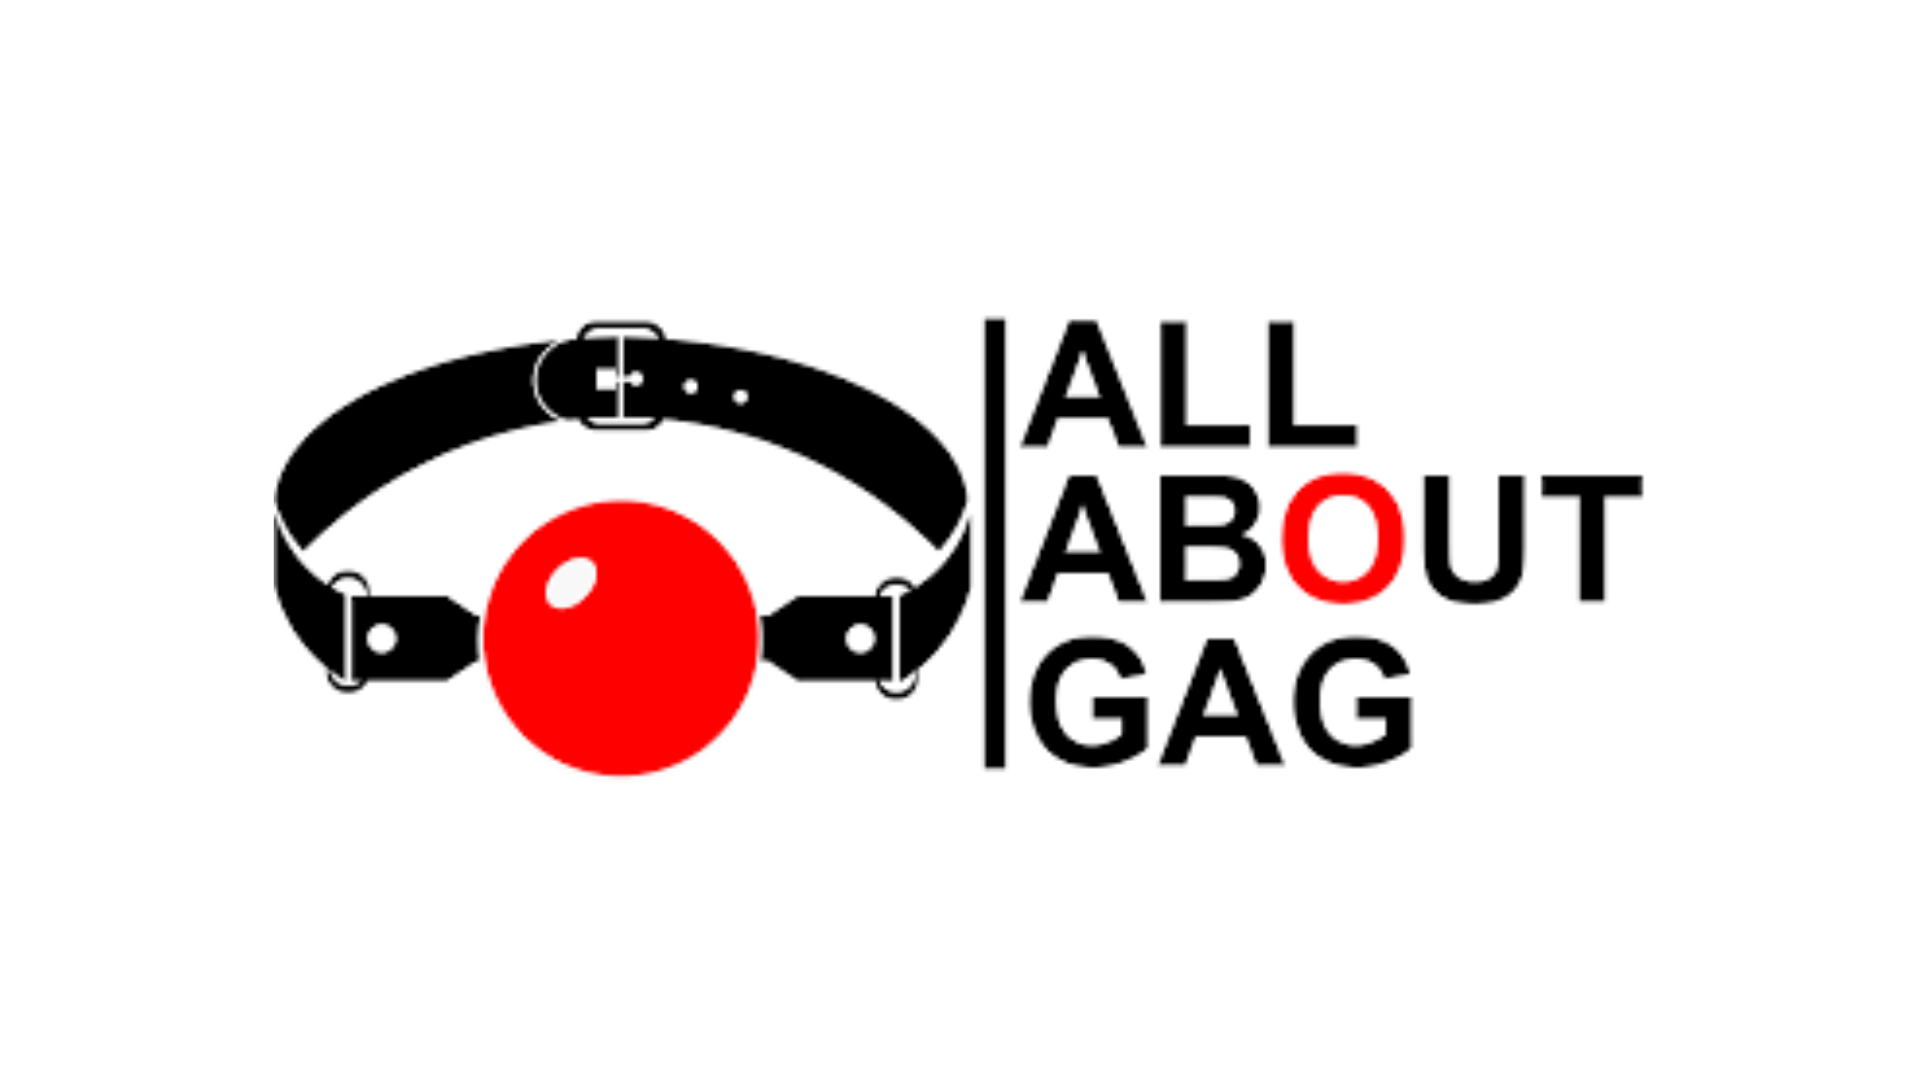 All about Gag